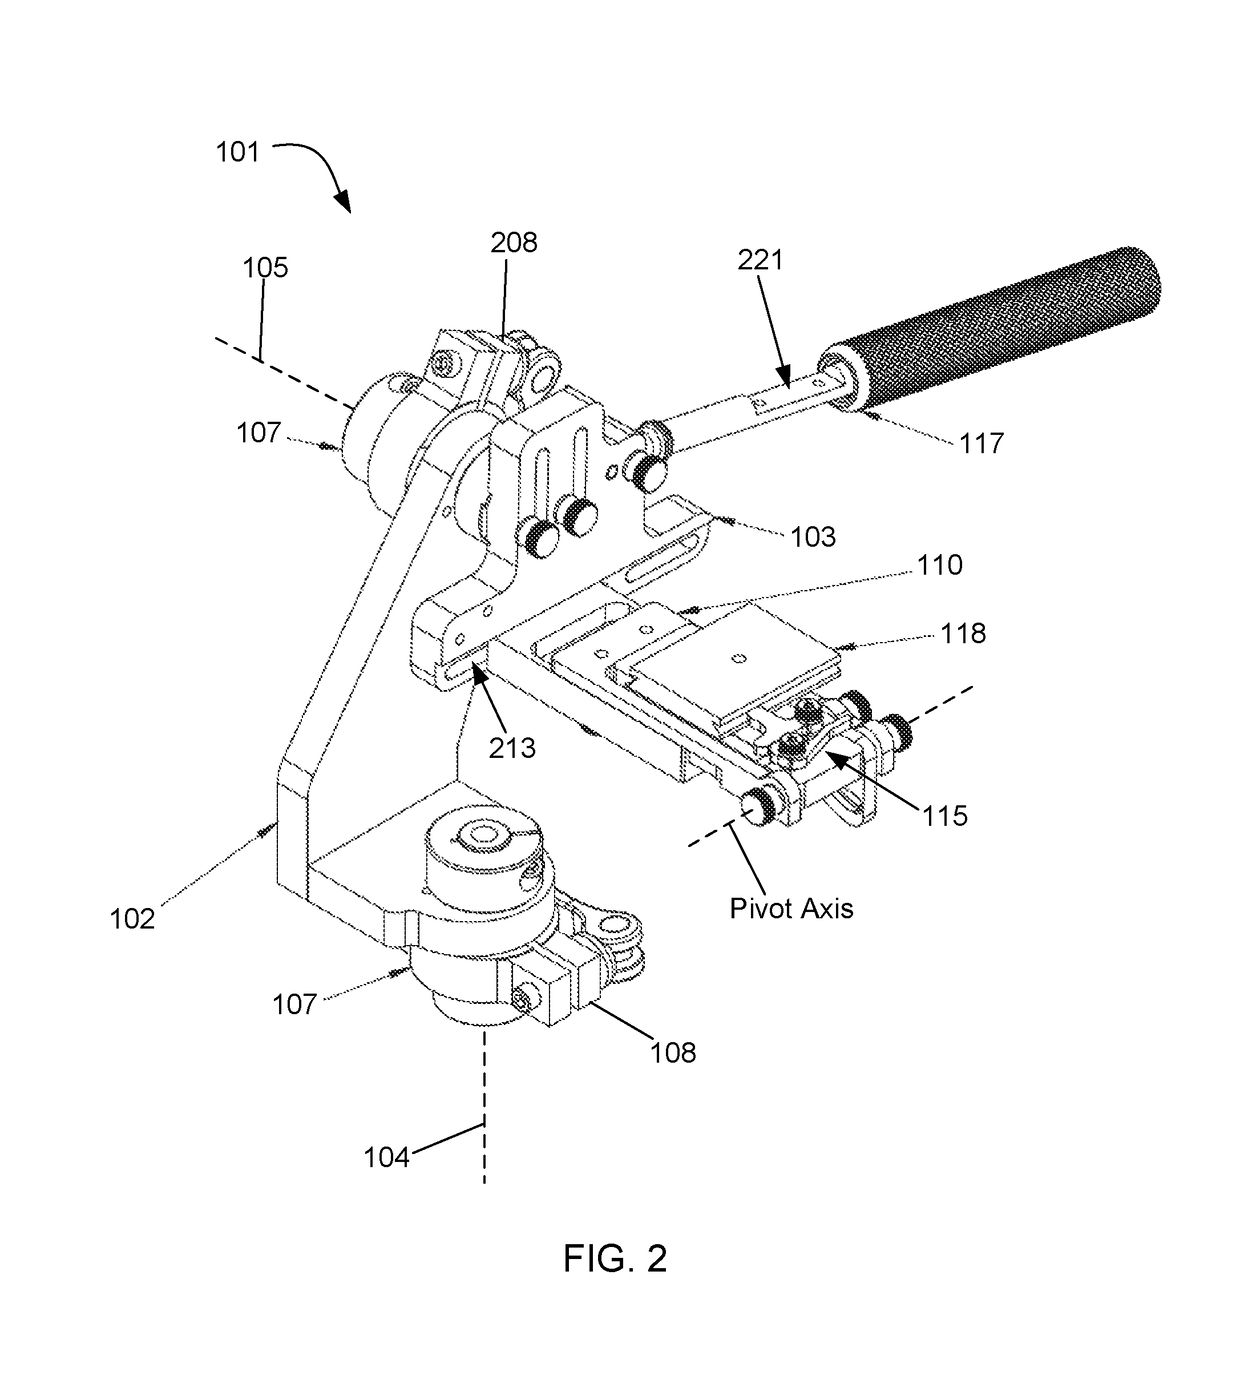 Optical mounting device